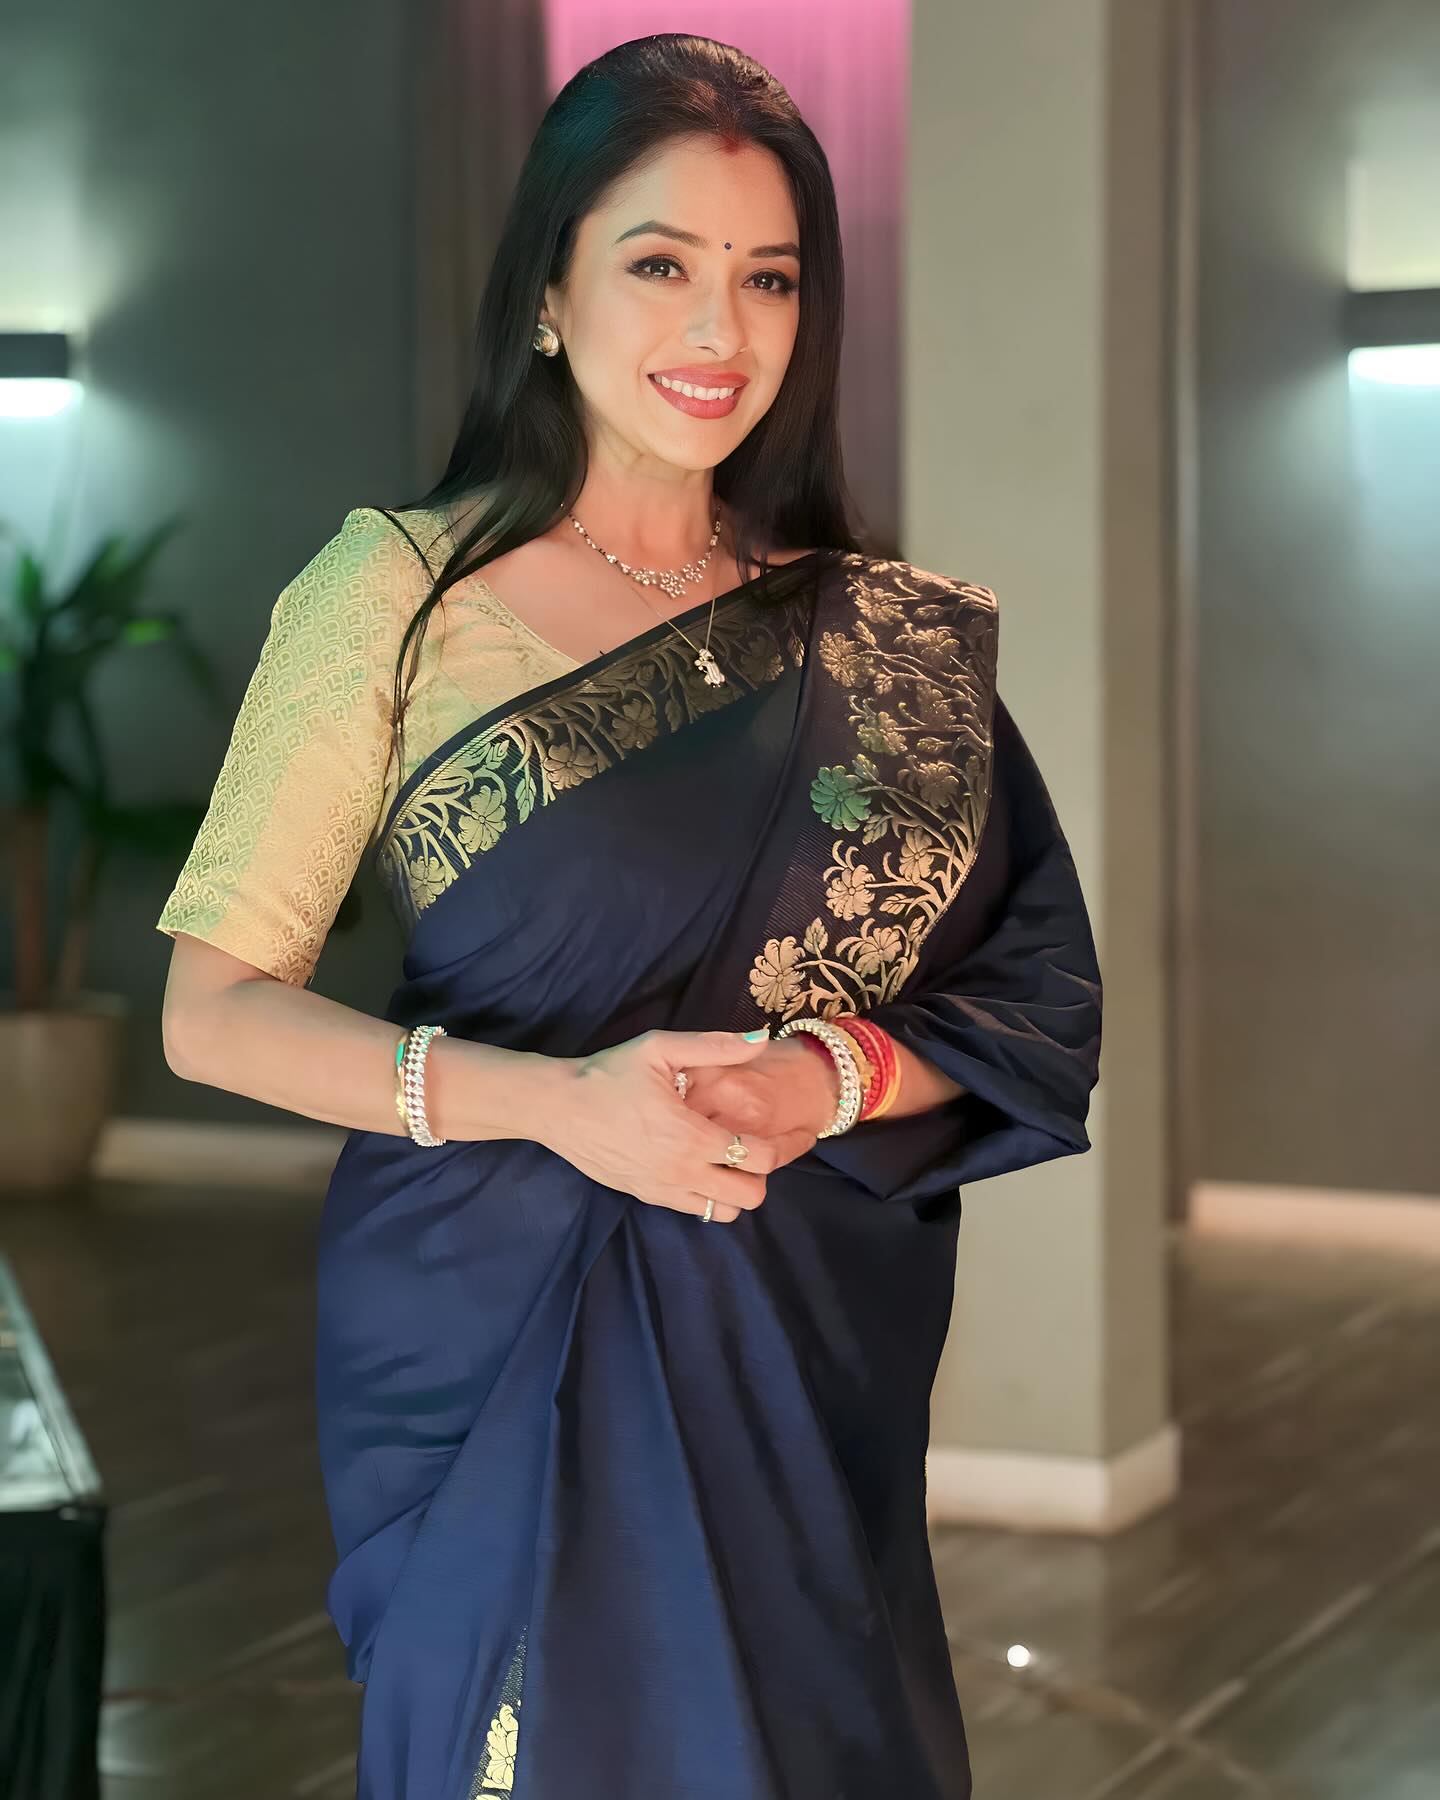 Actress Rupali Ganguly Is Excited About Her Diwali Shopping. She Said It Is Tradition To Go Kandeel Shopping For Diwali  